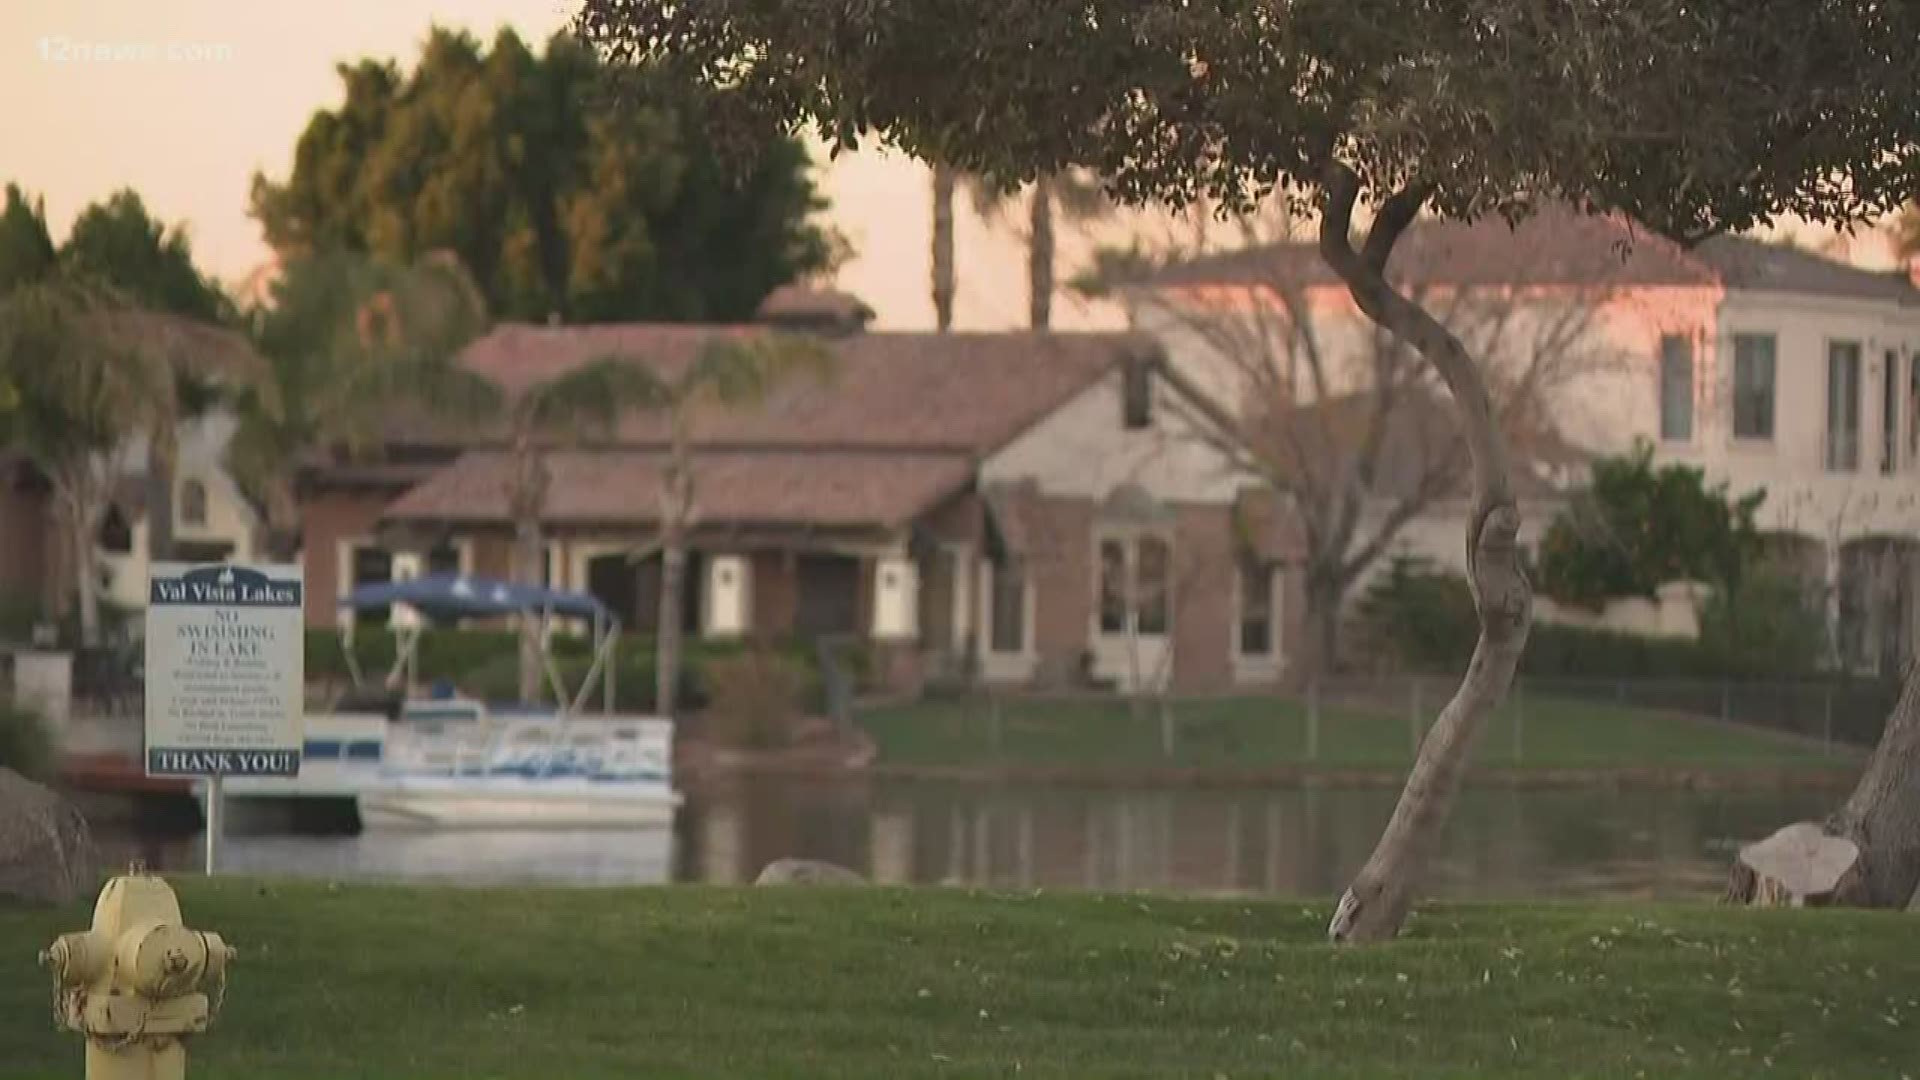 An HOA in a Gilbert neighborhood sent out letters threatening to fine people $250 per day for negative posts and even revoke their privileges to common areas.